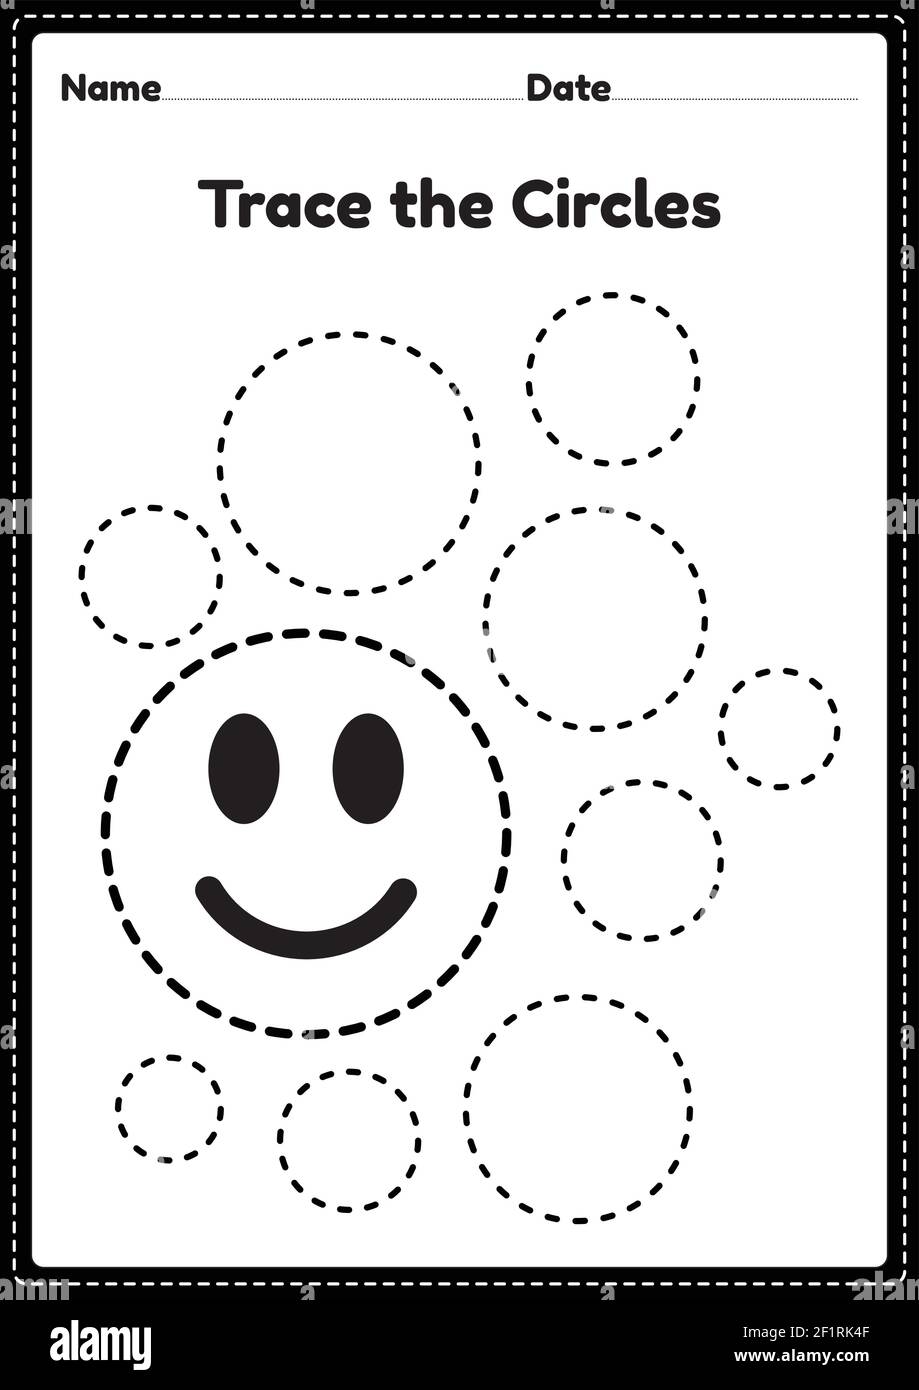 trace-the-circle-worksheet-for-kindergarten-and-preschoolers-kids-for